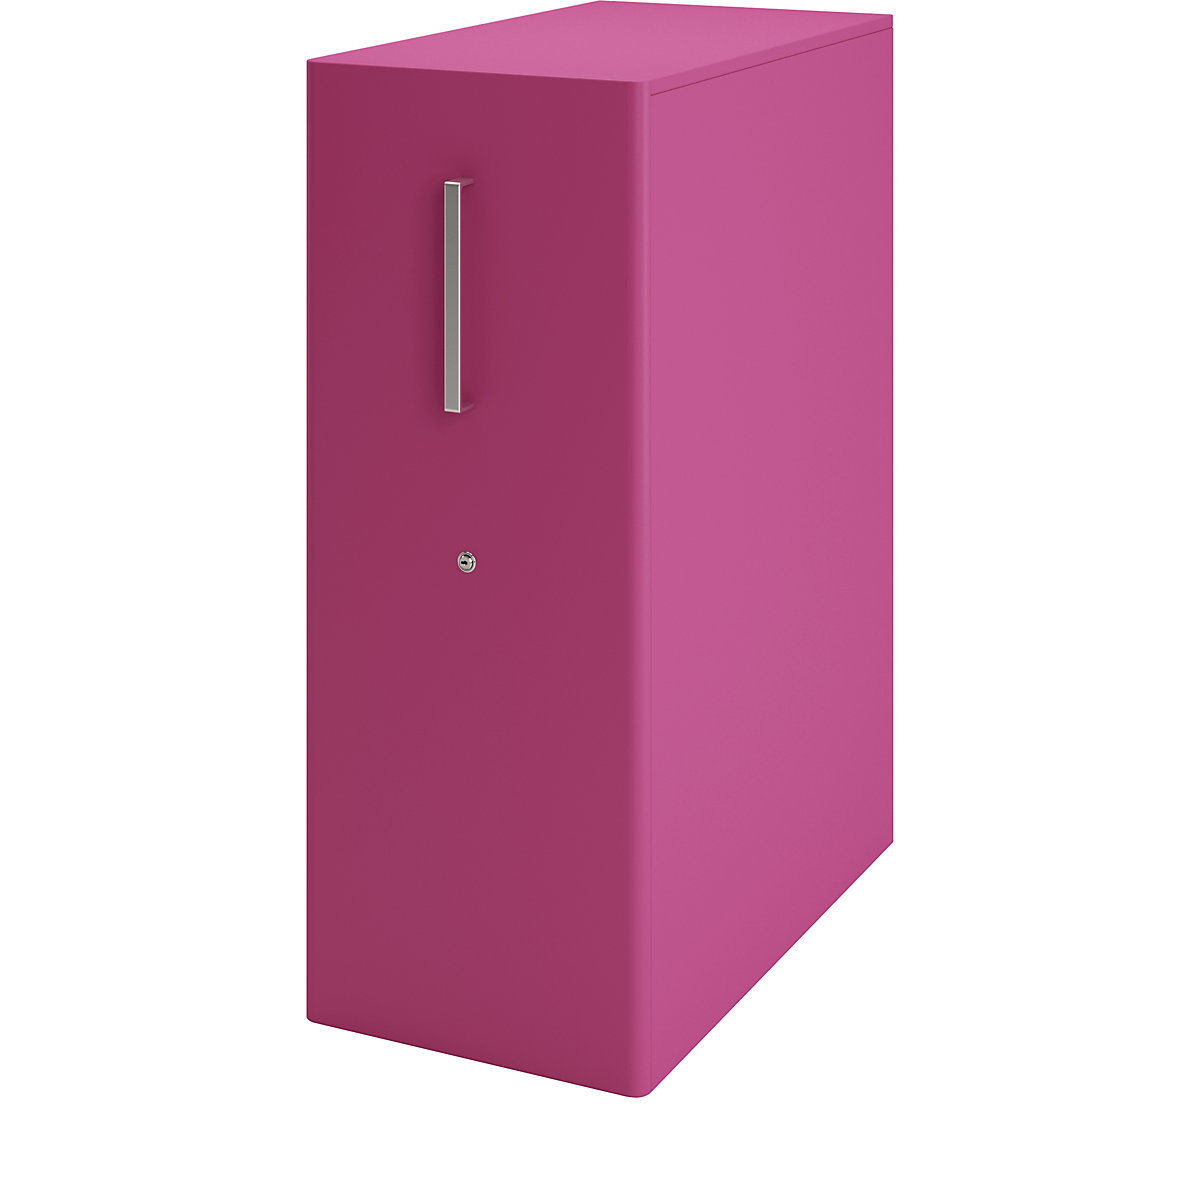 Tower™ 4 add-on furniture, with worktop – BISLEY, for the right side, 3 shelves, fuchsia-10